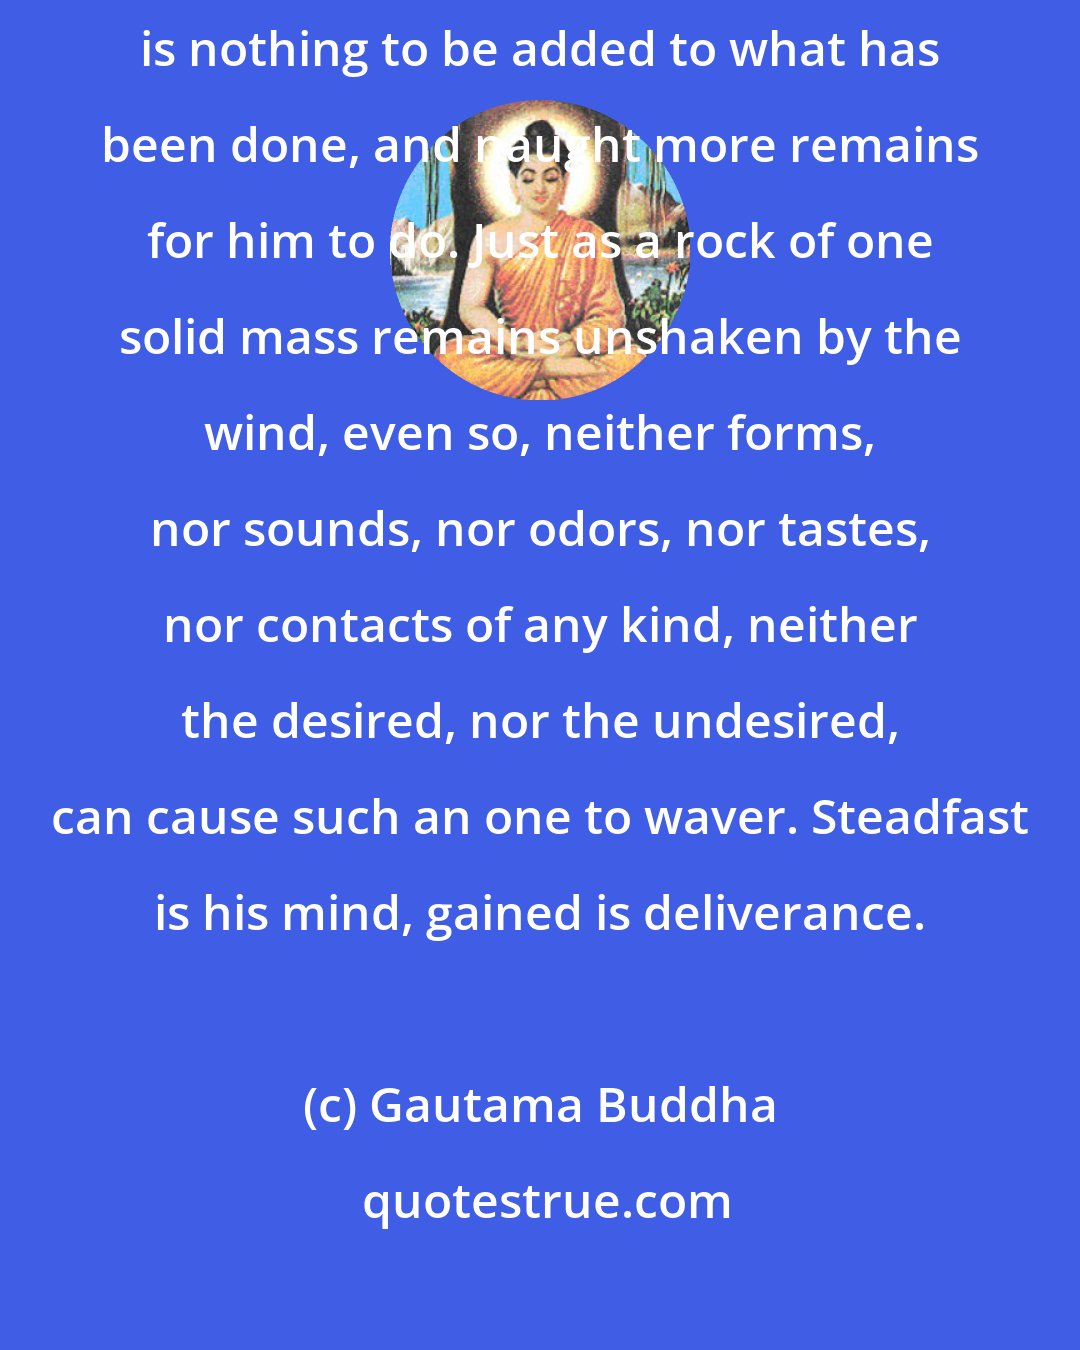 Gautama Buddha: And for a disciple thus freed, in whose heart dwells peace, there is nothing to be added to what has been done, and naught more remains for him to do. Just as a rock of one solid mass remains unshaken by the wind, even so, neither forms, nor sounds, nor odors, nor tastes, nor contacts of any kind, neither the desired, nor the undesired, can cause such an one to waver. Steadfast is his mind, gained is deliverance.